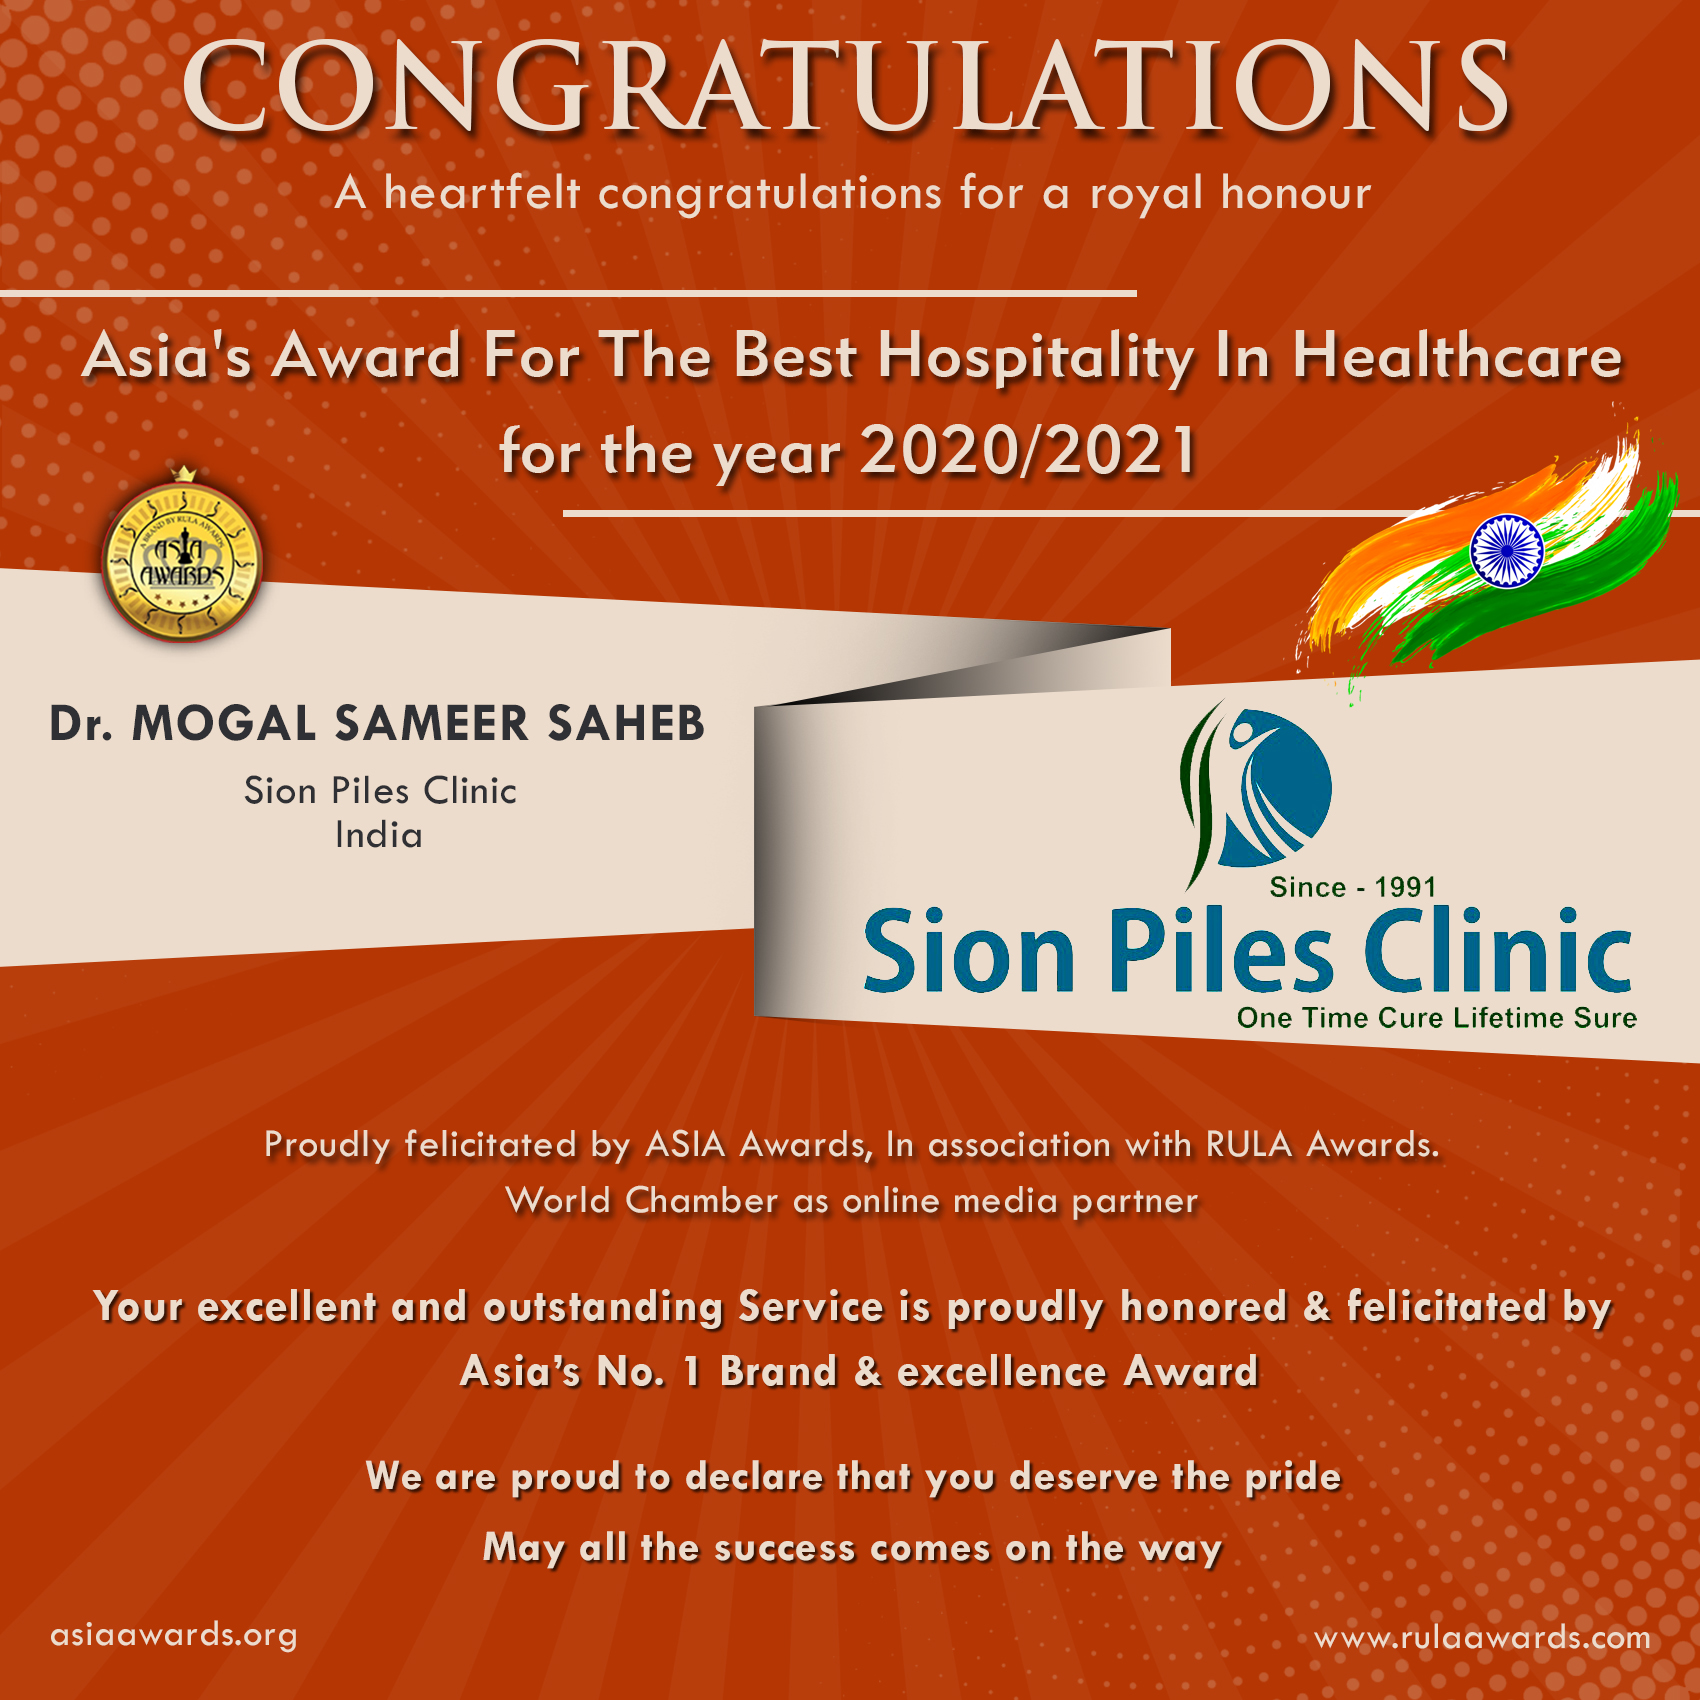 Sion Piles Clinic has bagged Asia's Award For the Best Hospitality In Healthcare